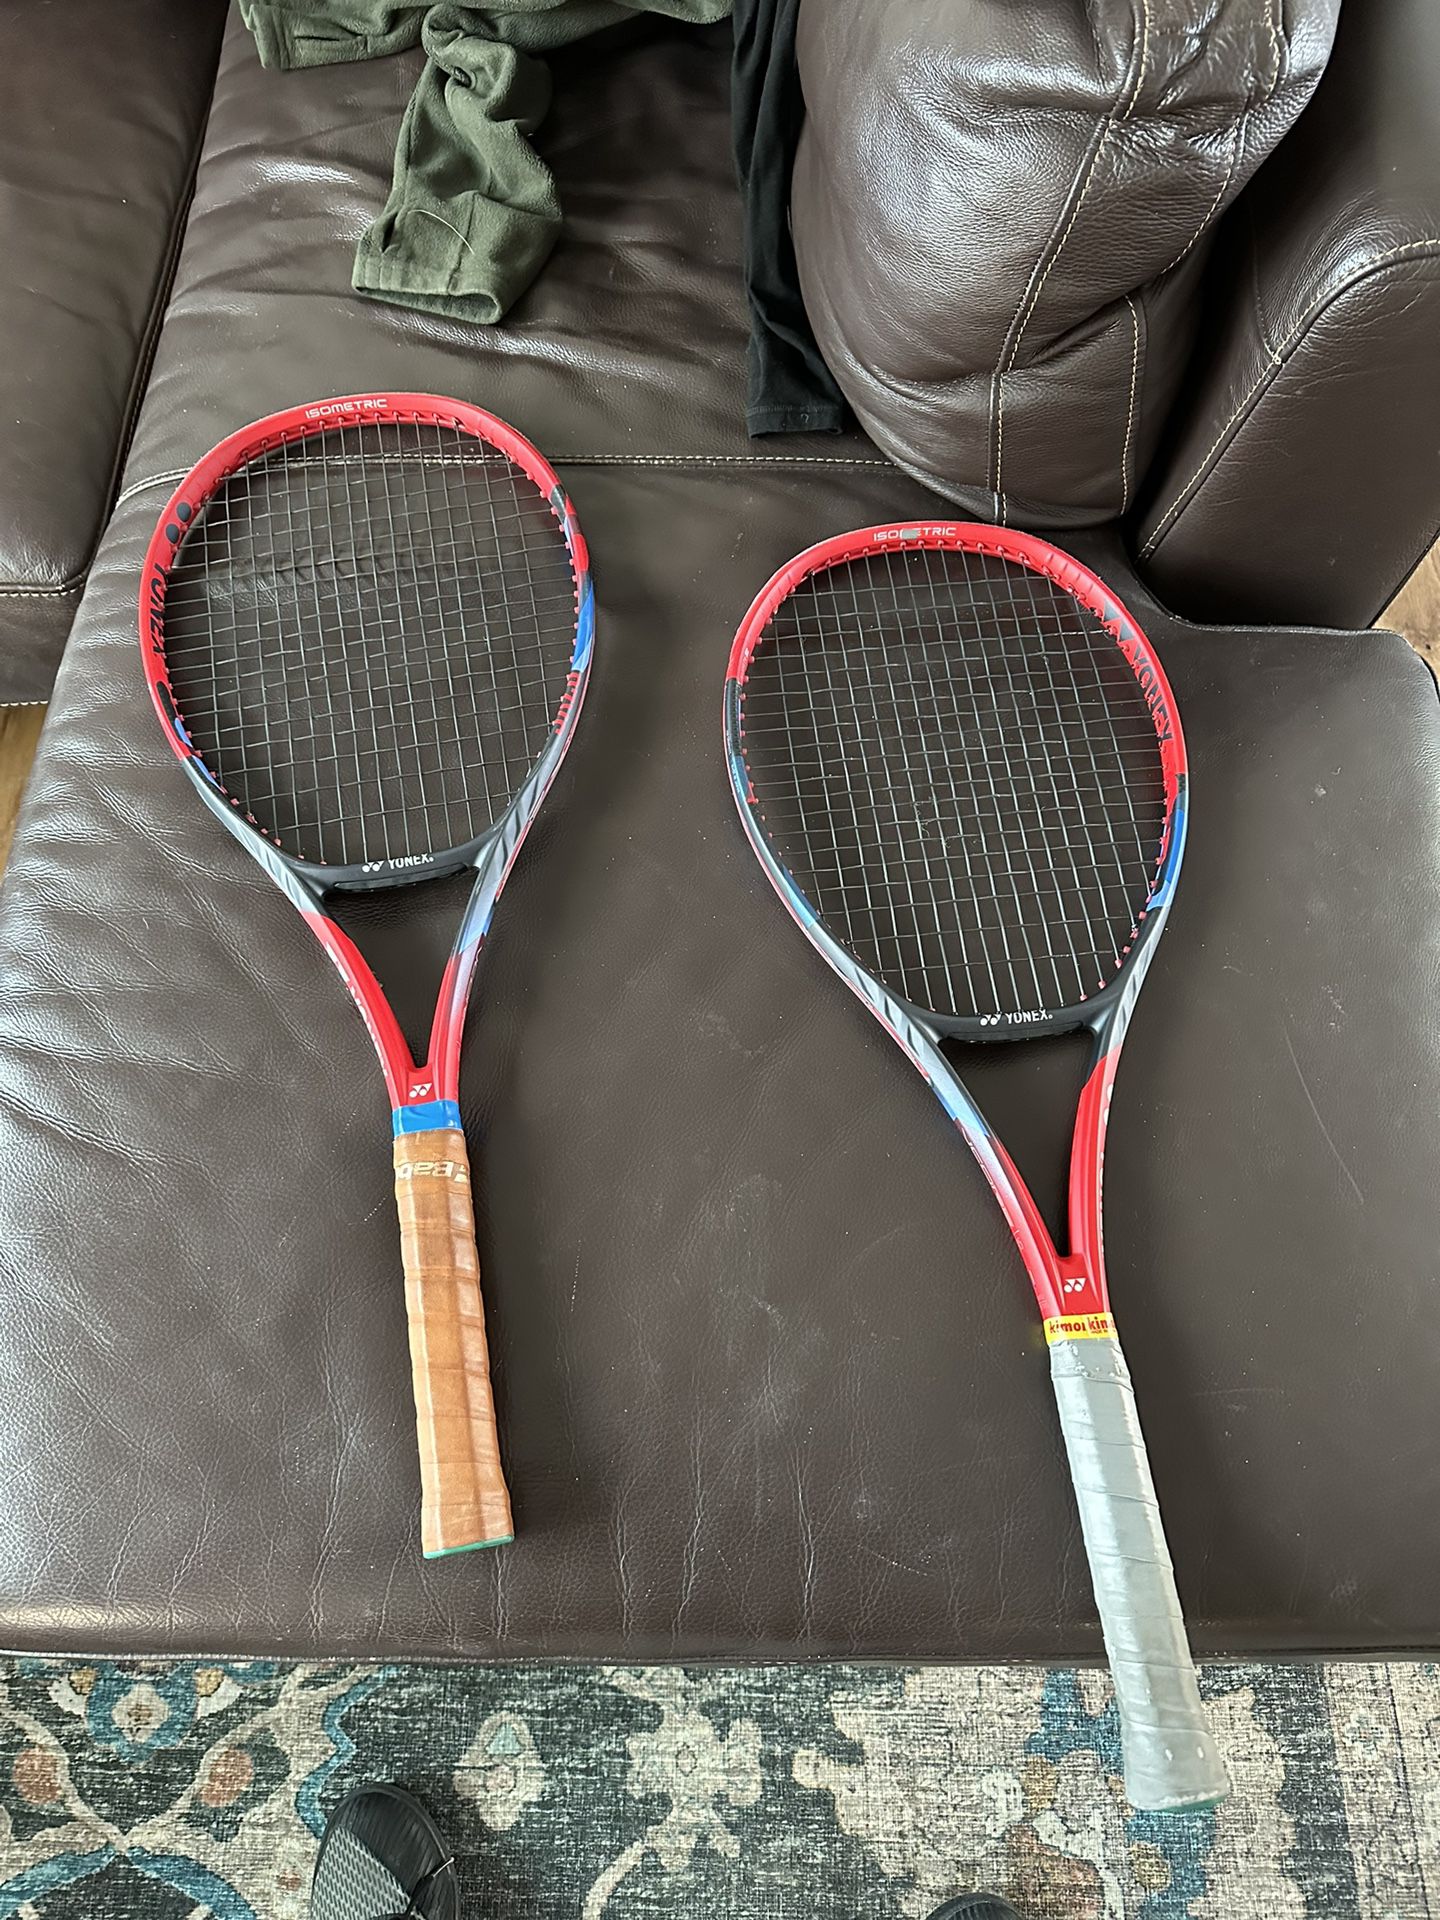 2 Yonnex Vcore Tennis Rackets. One Is 95 In The Other Is 98 In. Both Strung With RPM At 50lbs Grip Size Is #1 For Both. Asking $100 Each